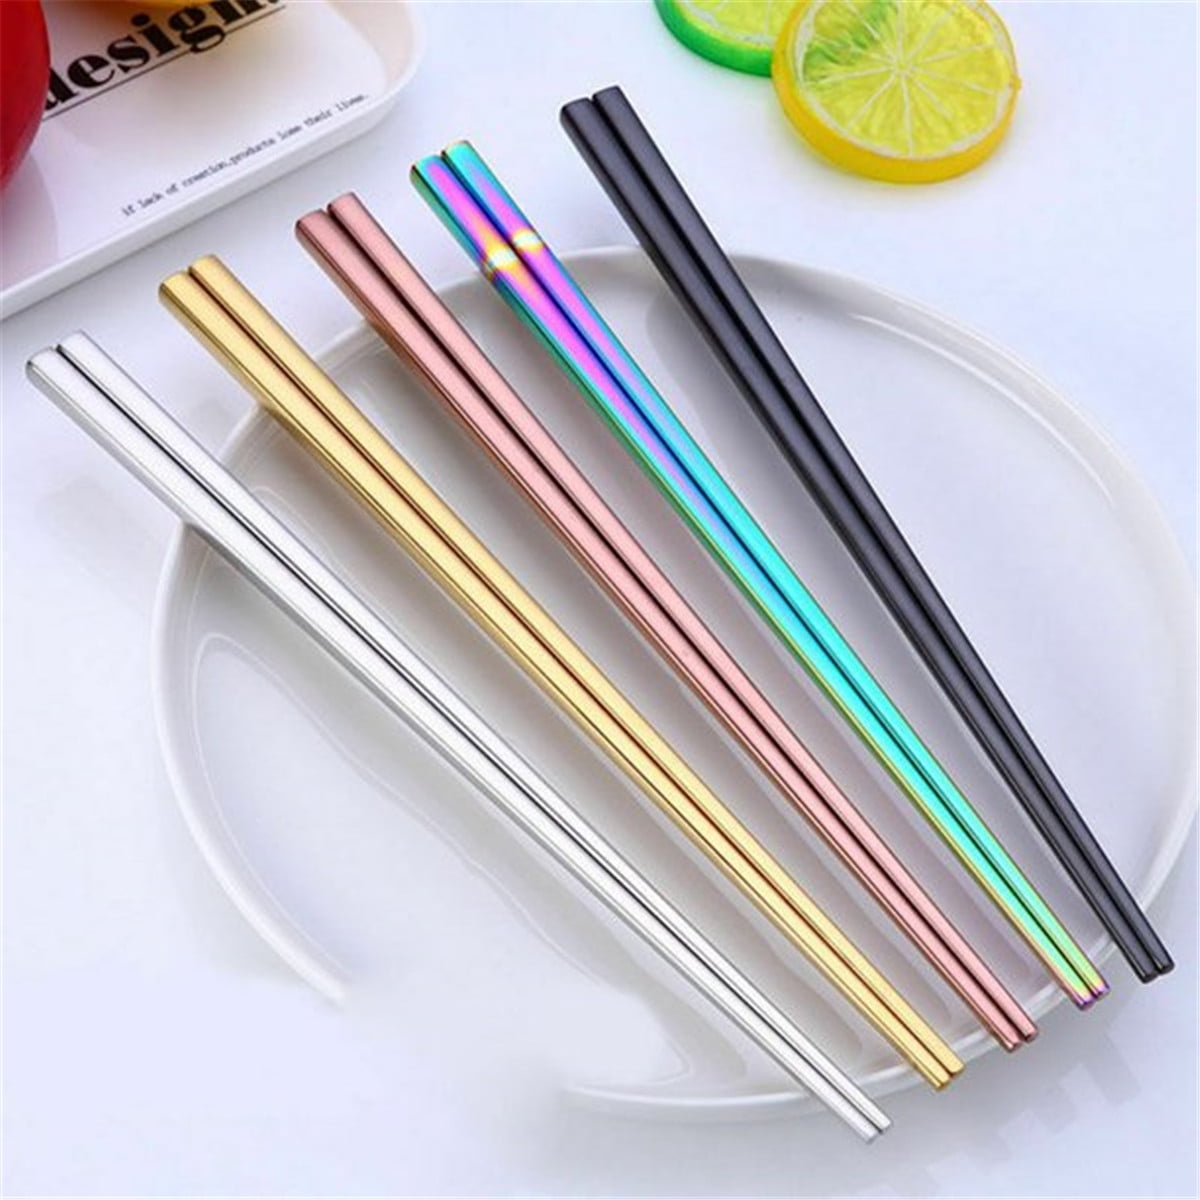 2 Pairs Colorful Chopsticks East Asian Style Stainless Steel Chop Sticks Gift 